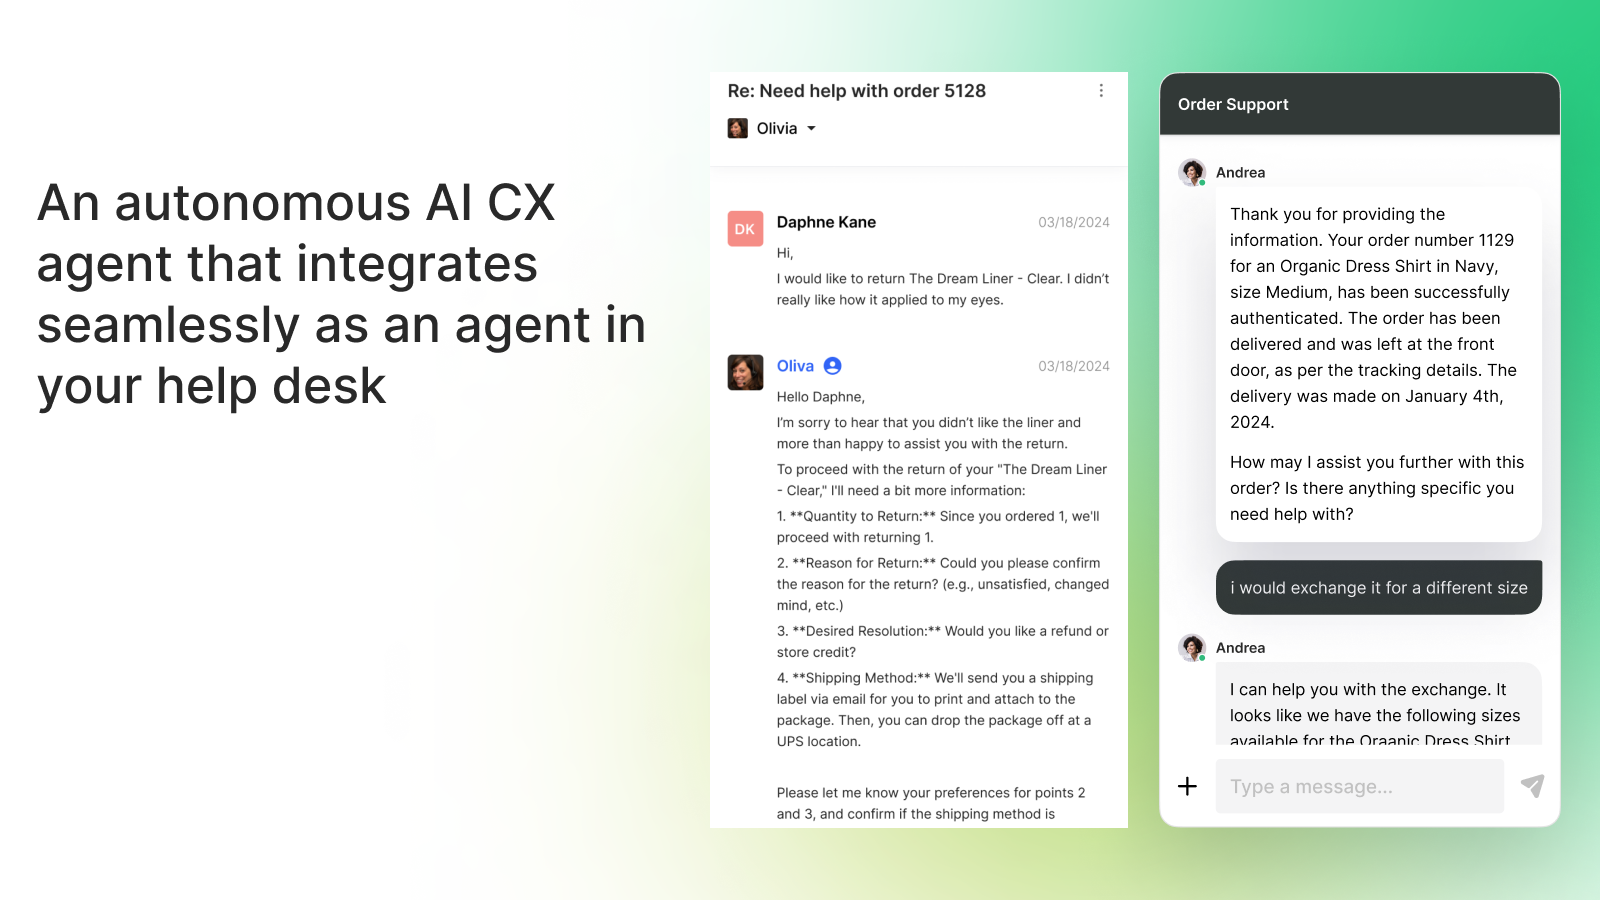 An AI CX agent that integrates seamlessly in your help desk